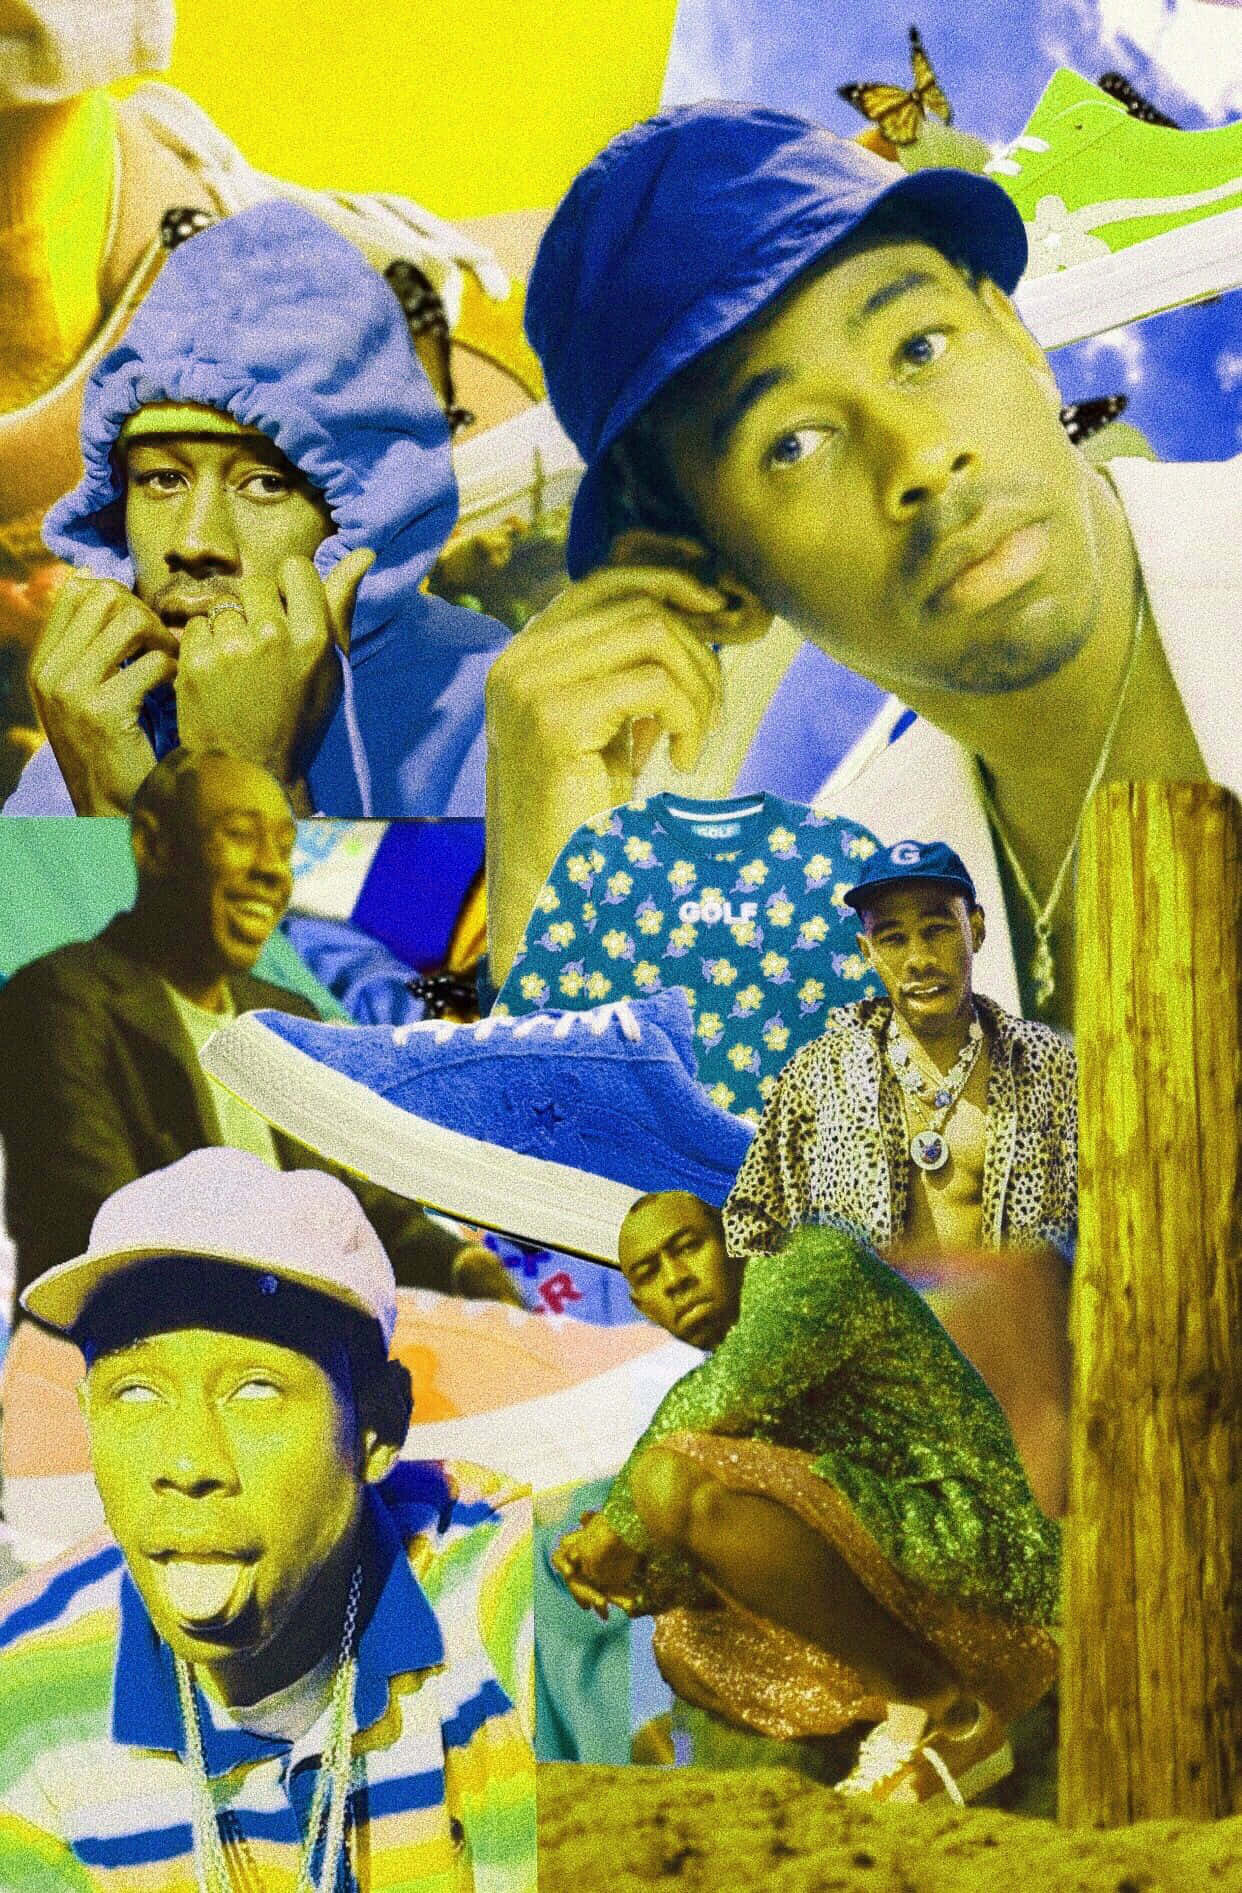 A three-angle portrait of the exuberant American rapper, singer, songwriter and producer, Tyler The Creator. Wallpaper